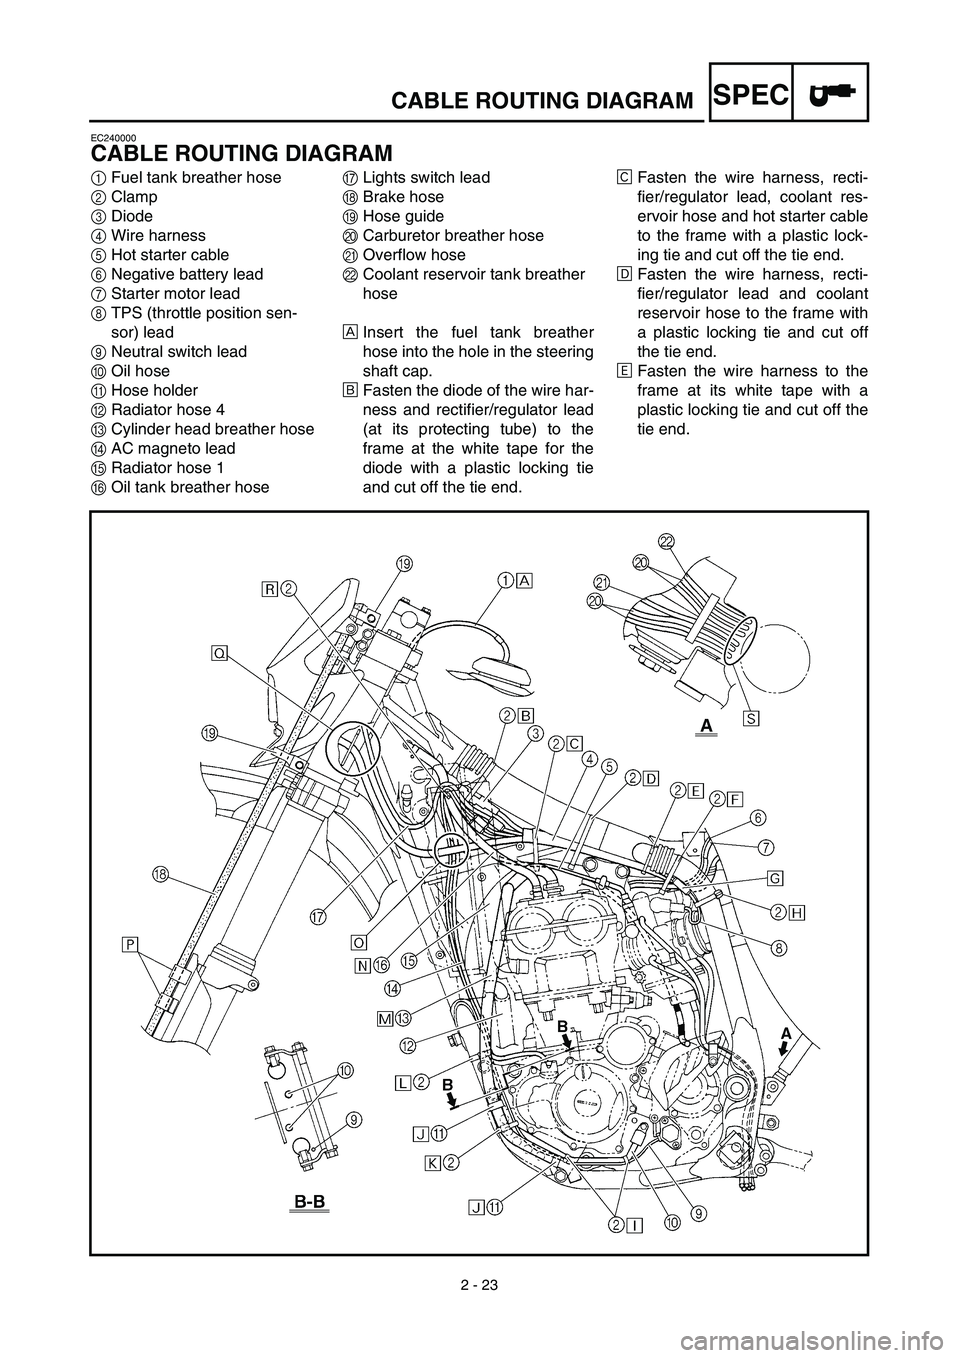 YAMAHA WR 450F 2003  Manuale de Empleo (in Spanish)  
2 - 23
SPEC
 
CABLE ROUTING DIAGRAM 
EC240000 
CABLE ROUTING DIAGRAM 
1 
Fuel tank breather hose 
2 
Clamp 
3 
Diode 
4 
Wire harness 
5 
Hot starter cable 
6 
Negative battery lead 
7 
Starter moto